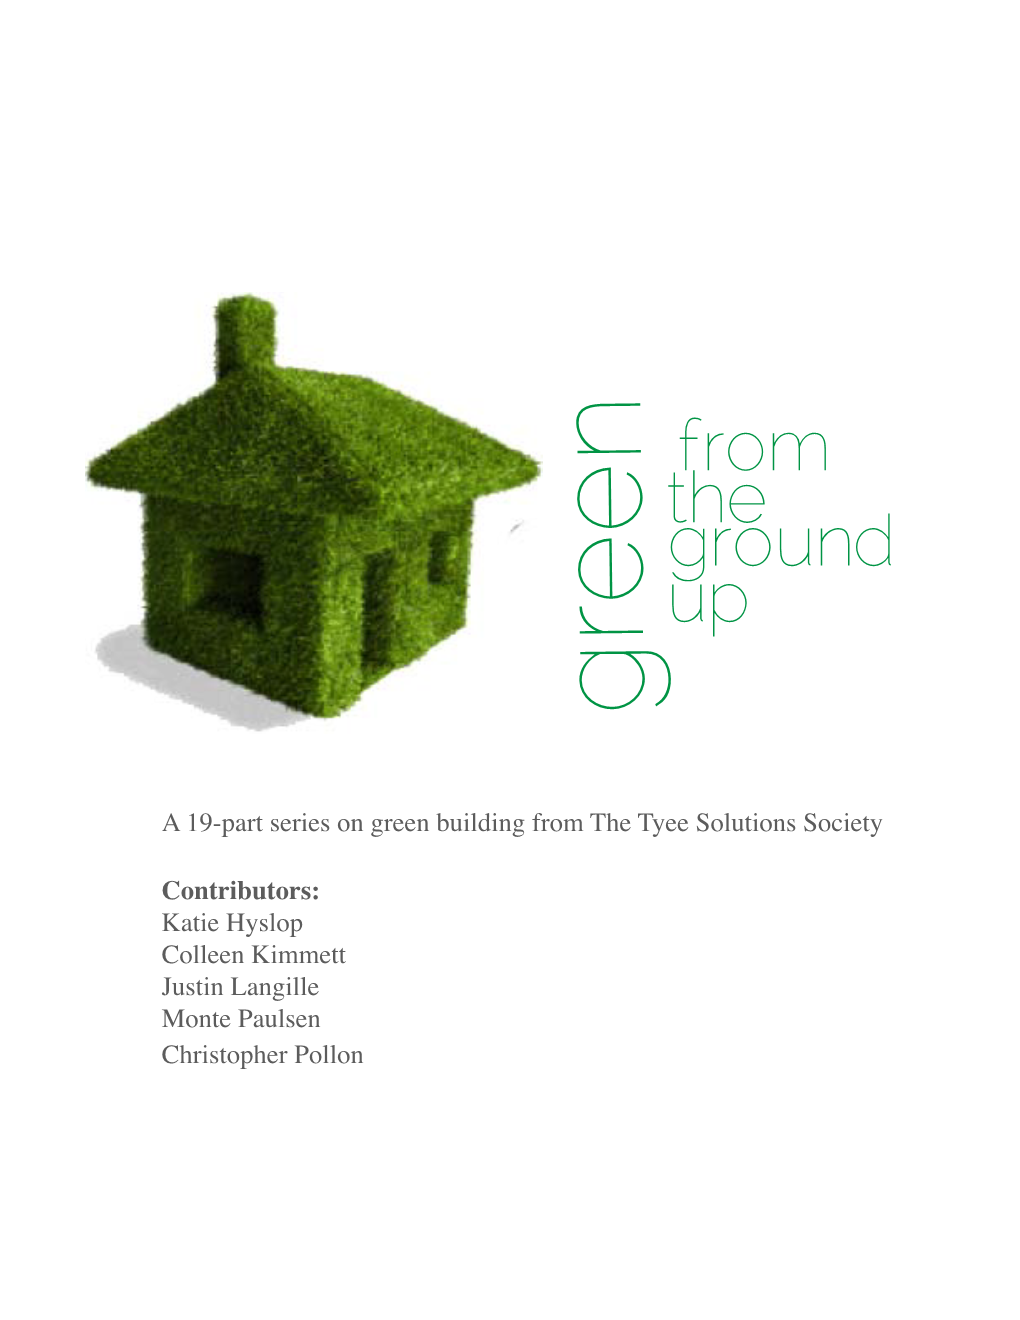 Green from the Ground Up, a 19-Part Series from Tyee Solutions Society on Sustainable Building Solutions in B.C